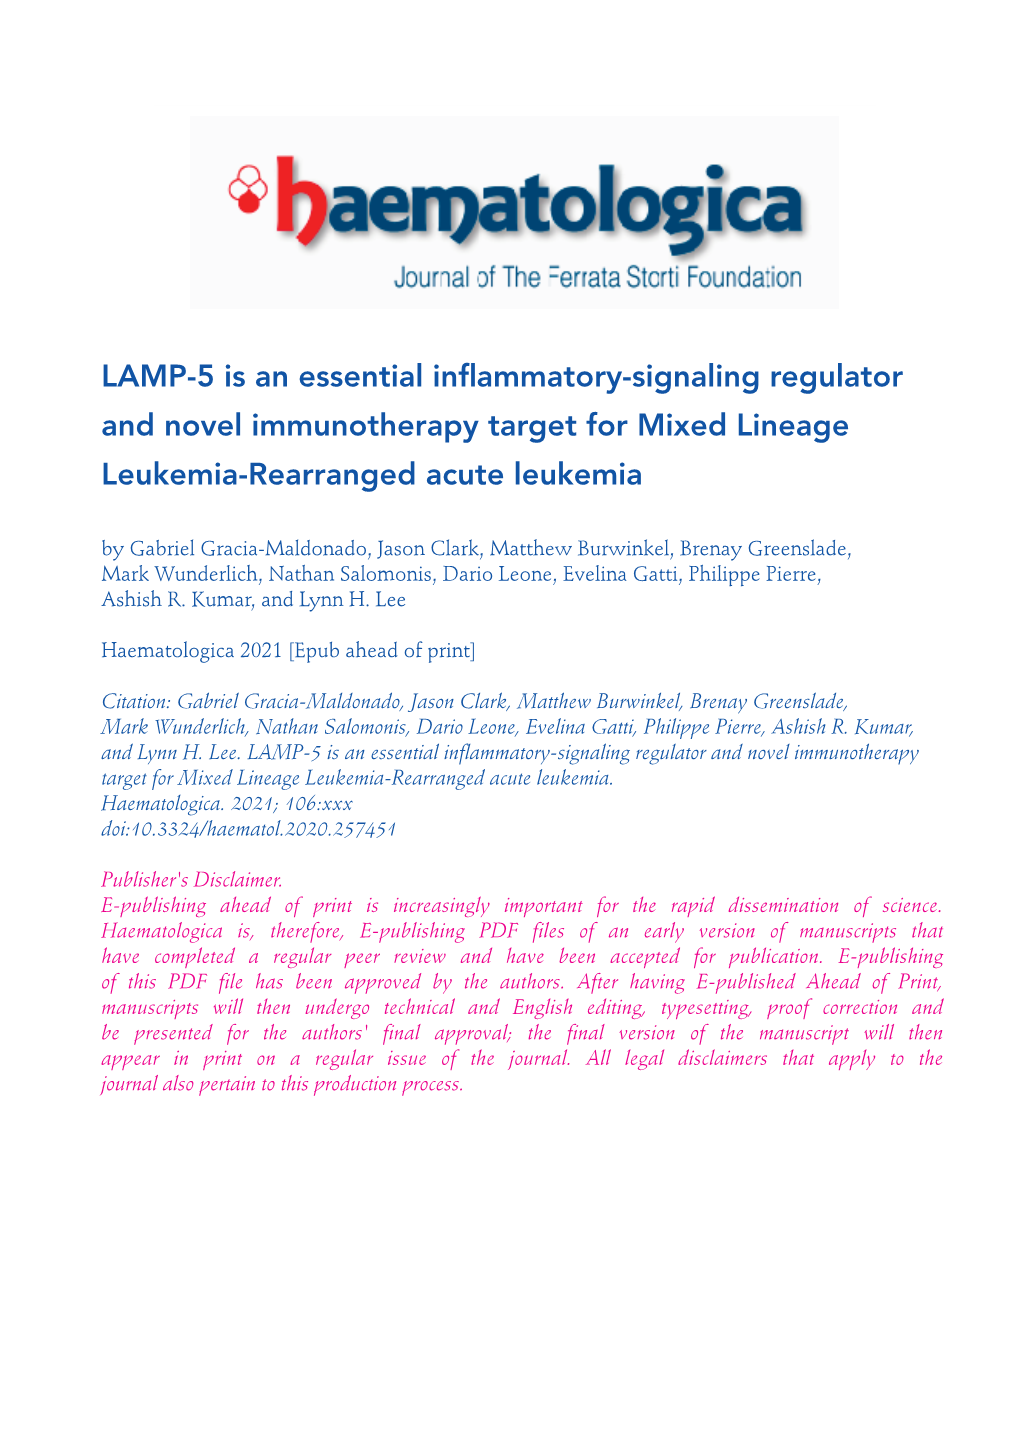 LAMP-5 Is an Essential Inflammatory-Signaling Regulator and Novel Immunotherapy Target for Mixed Lineage Leukemia-Rearranged Acute Leukemia